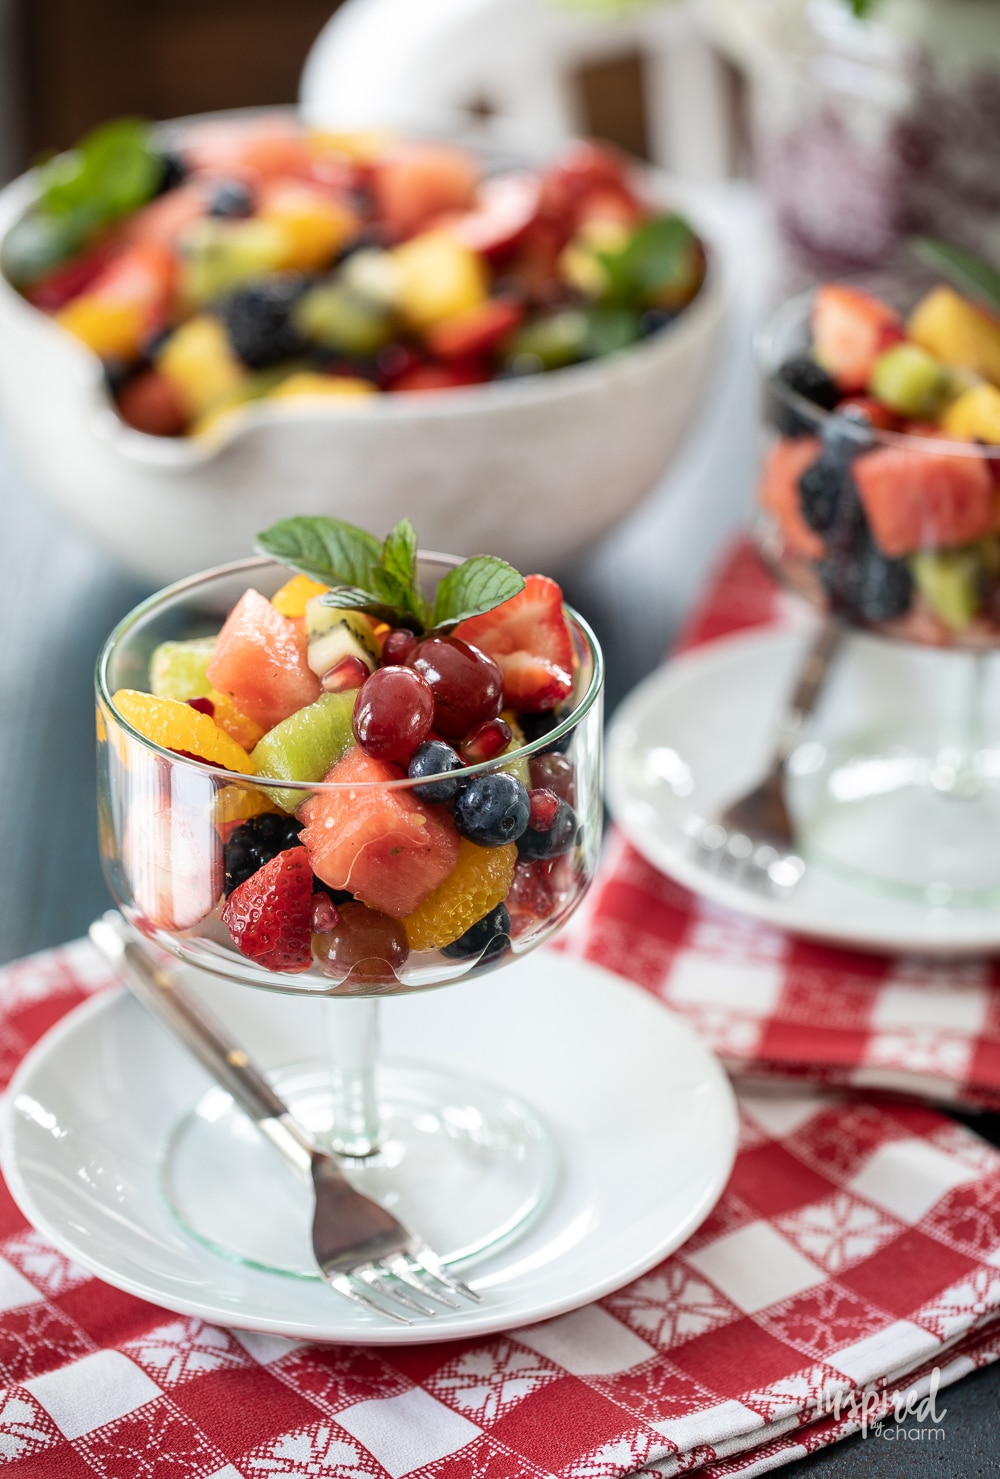 fruit salad in a glass footed dish on a plate with a big bowl of fruit.